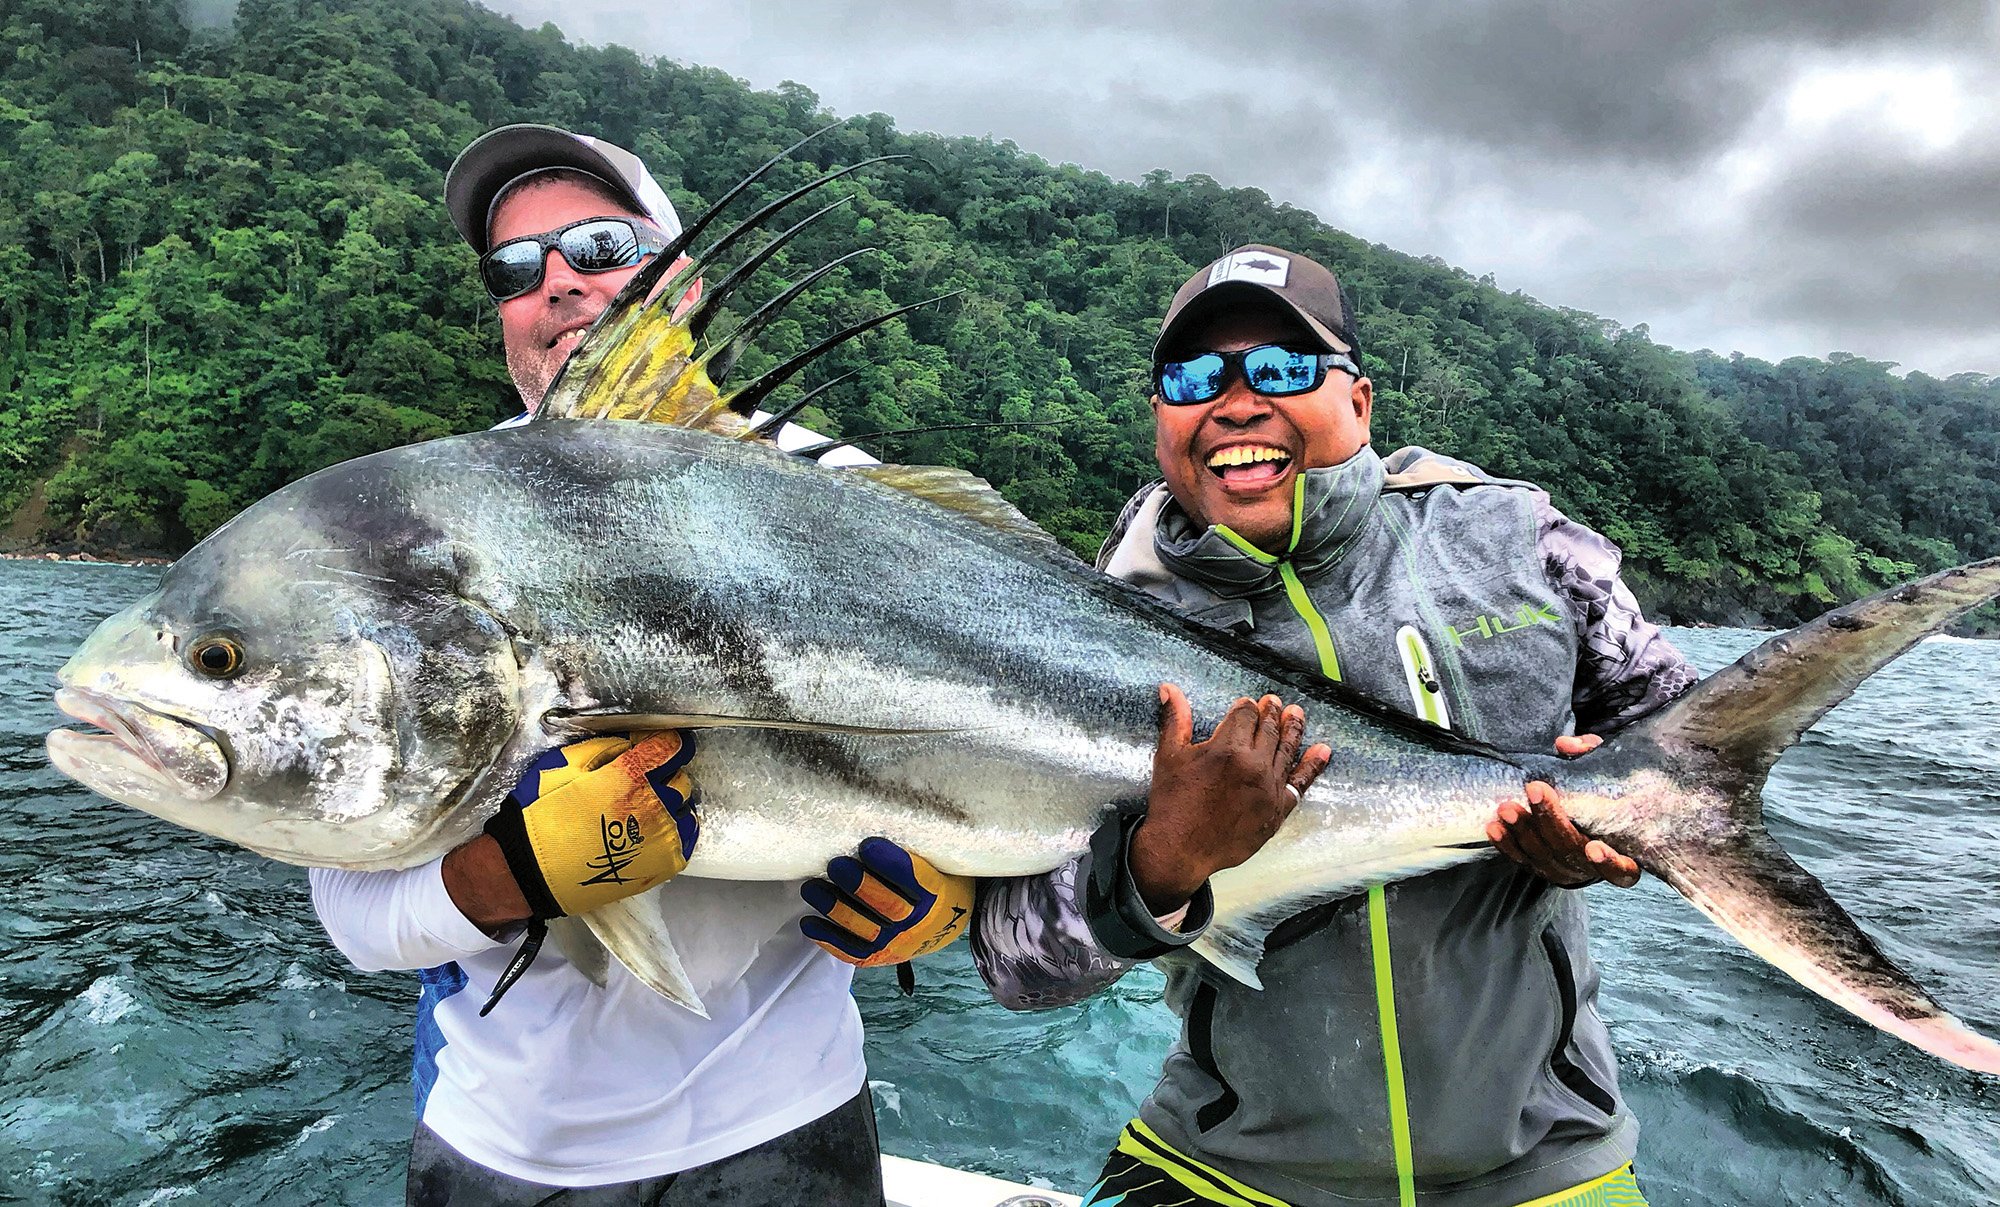 Panama’s Tropic Star Lodge, Anglers and Piscatorial Pursuits